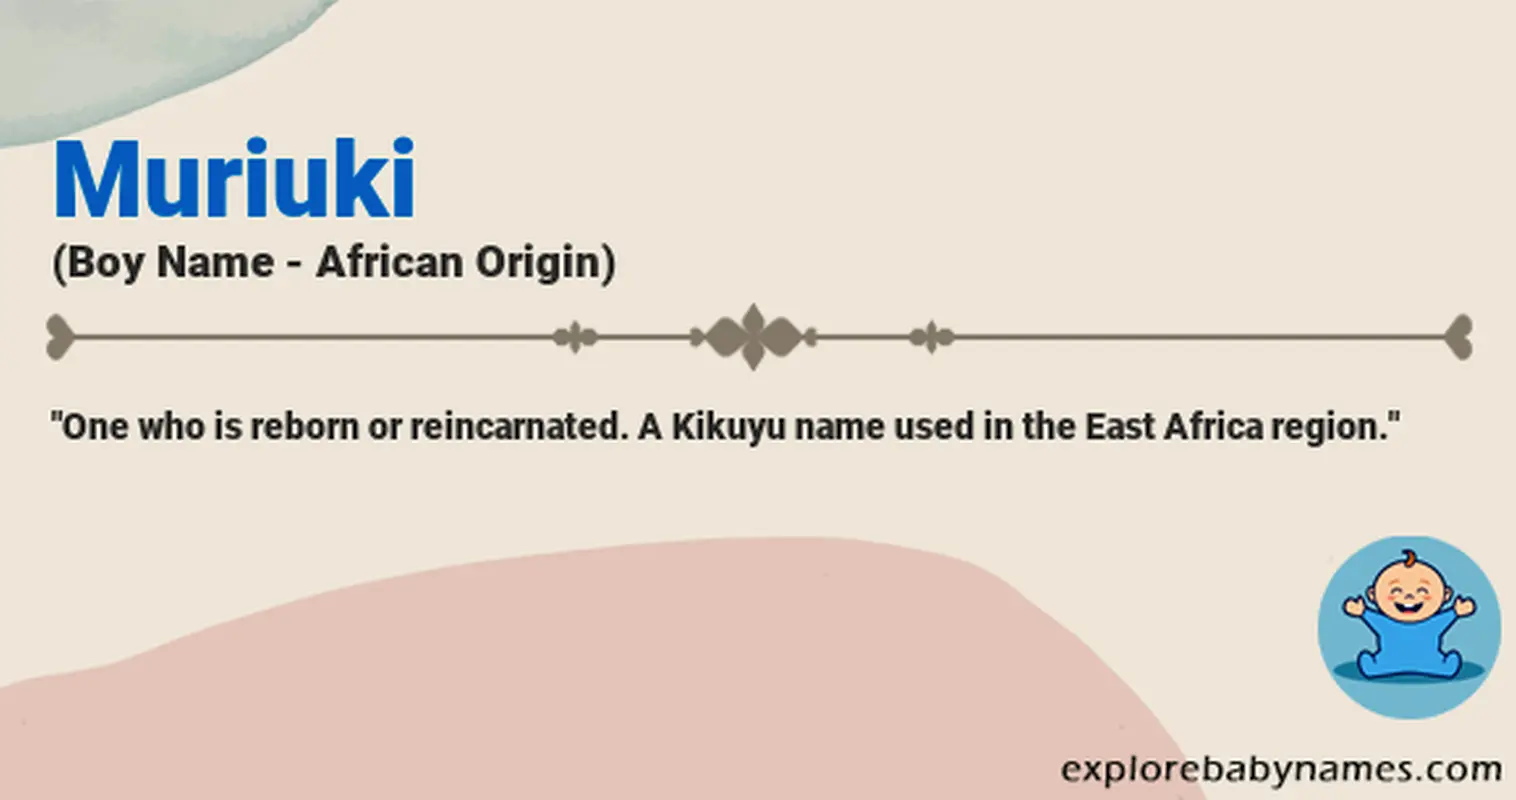 Meaning of Muriuki